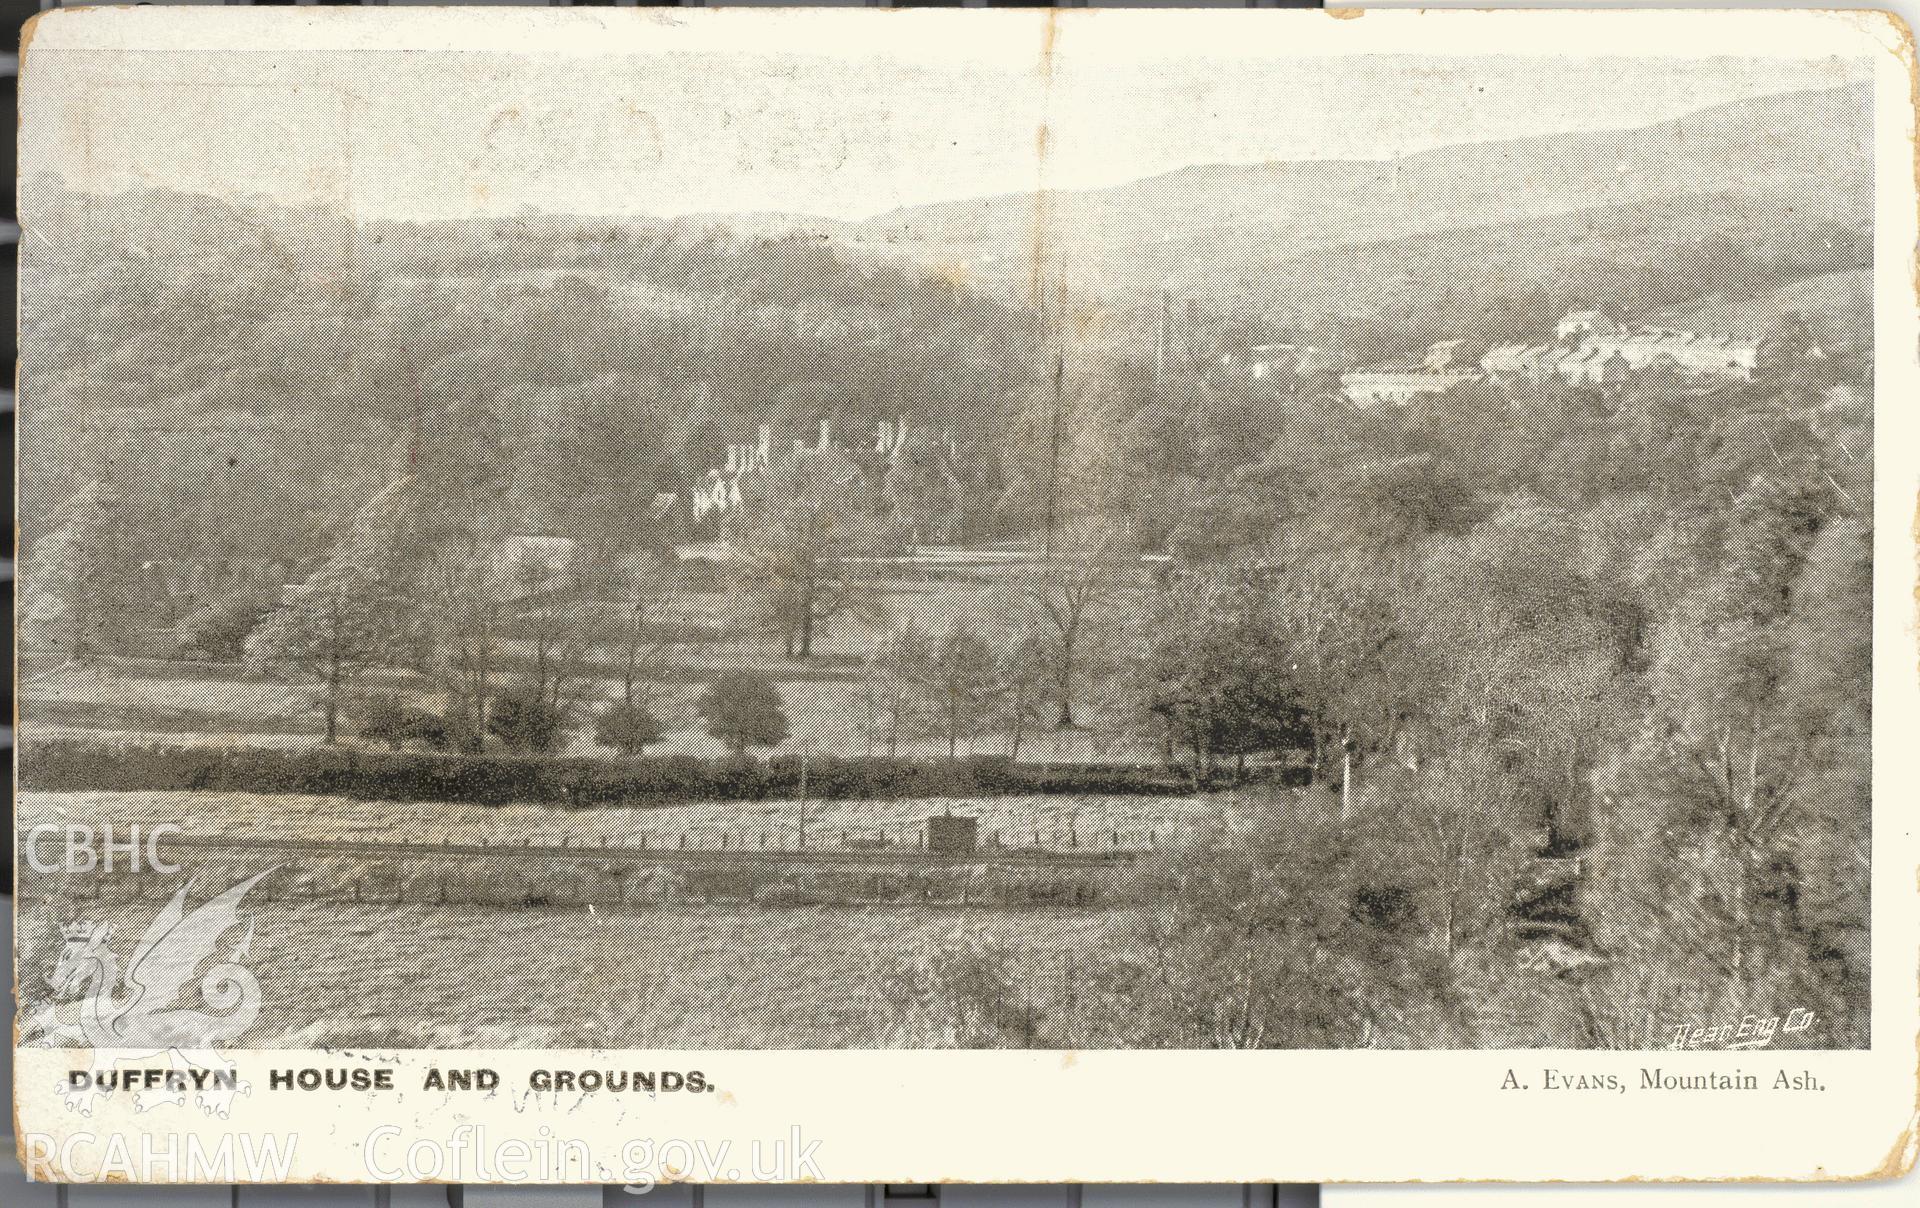 Digitised postcard image of Dyffryn House, Mountain Ash, showing house and surrounds,  A Evans Mountain Ash. Produced by Parks and Gardens Data Services, from an original item in the Peter Davis Collection at Parks and Gardens UK. We hold only web-resolution images of this collection, suitable for viewing on screen and for research purposes only. We do not hold the original images, or publication quality scans.